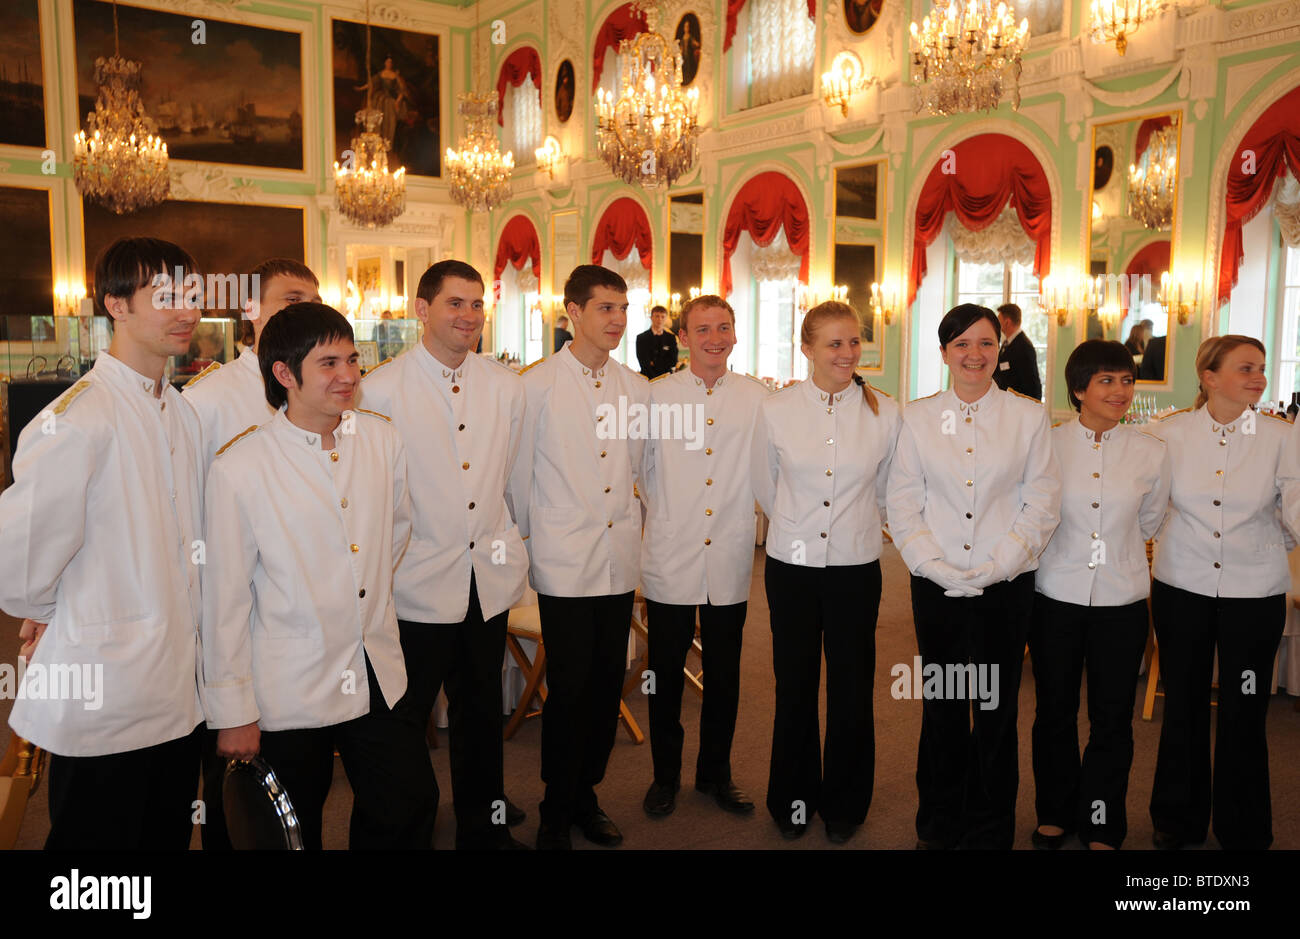 The service staff at a gala dinner at the Peterhof Palace, Saint Petersburg, Russia Stock Photo